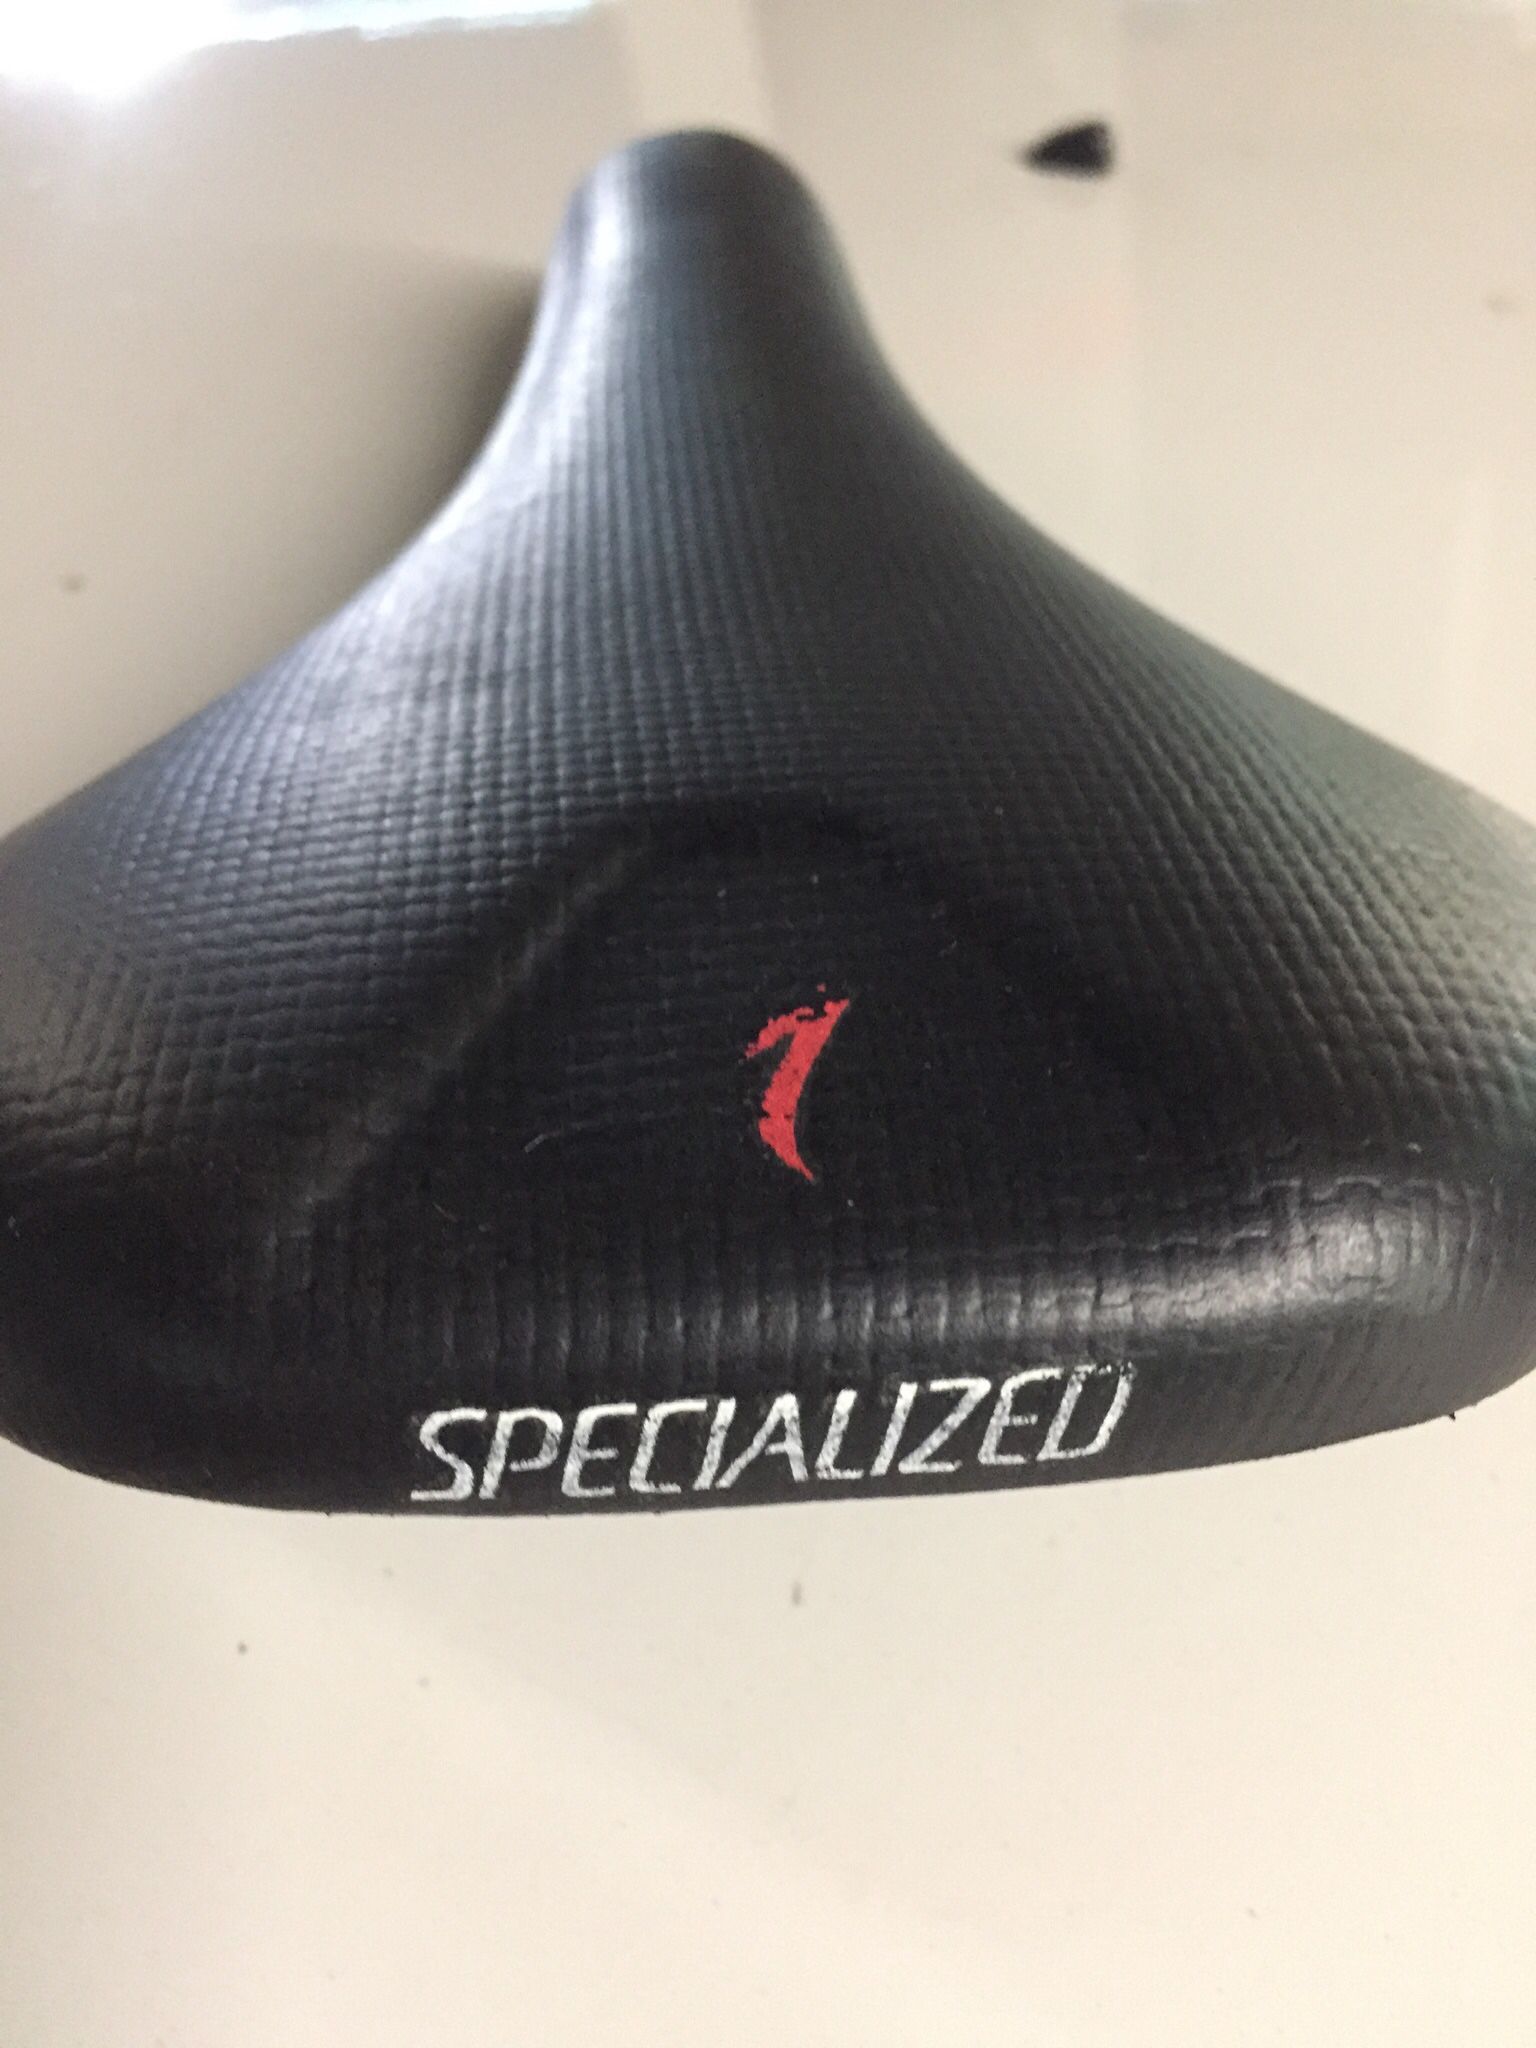 New Specialized Saddle Bike Seat Available